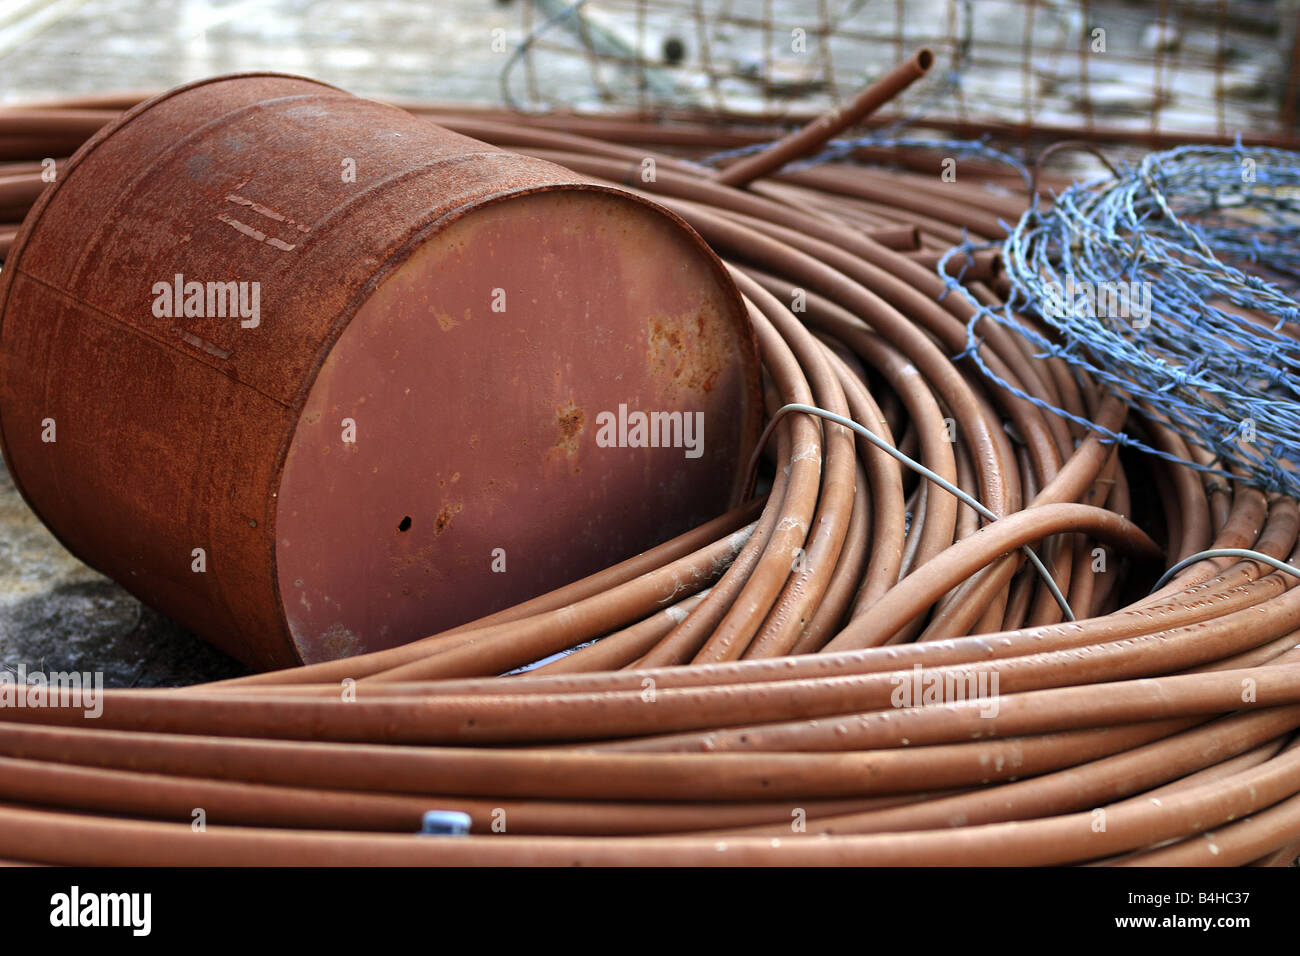 Oil Can Hose and Barbed Wire on Farm, Texas Stock Photo